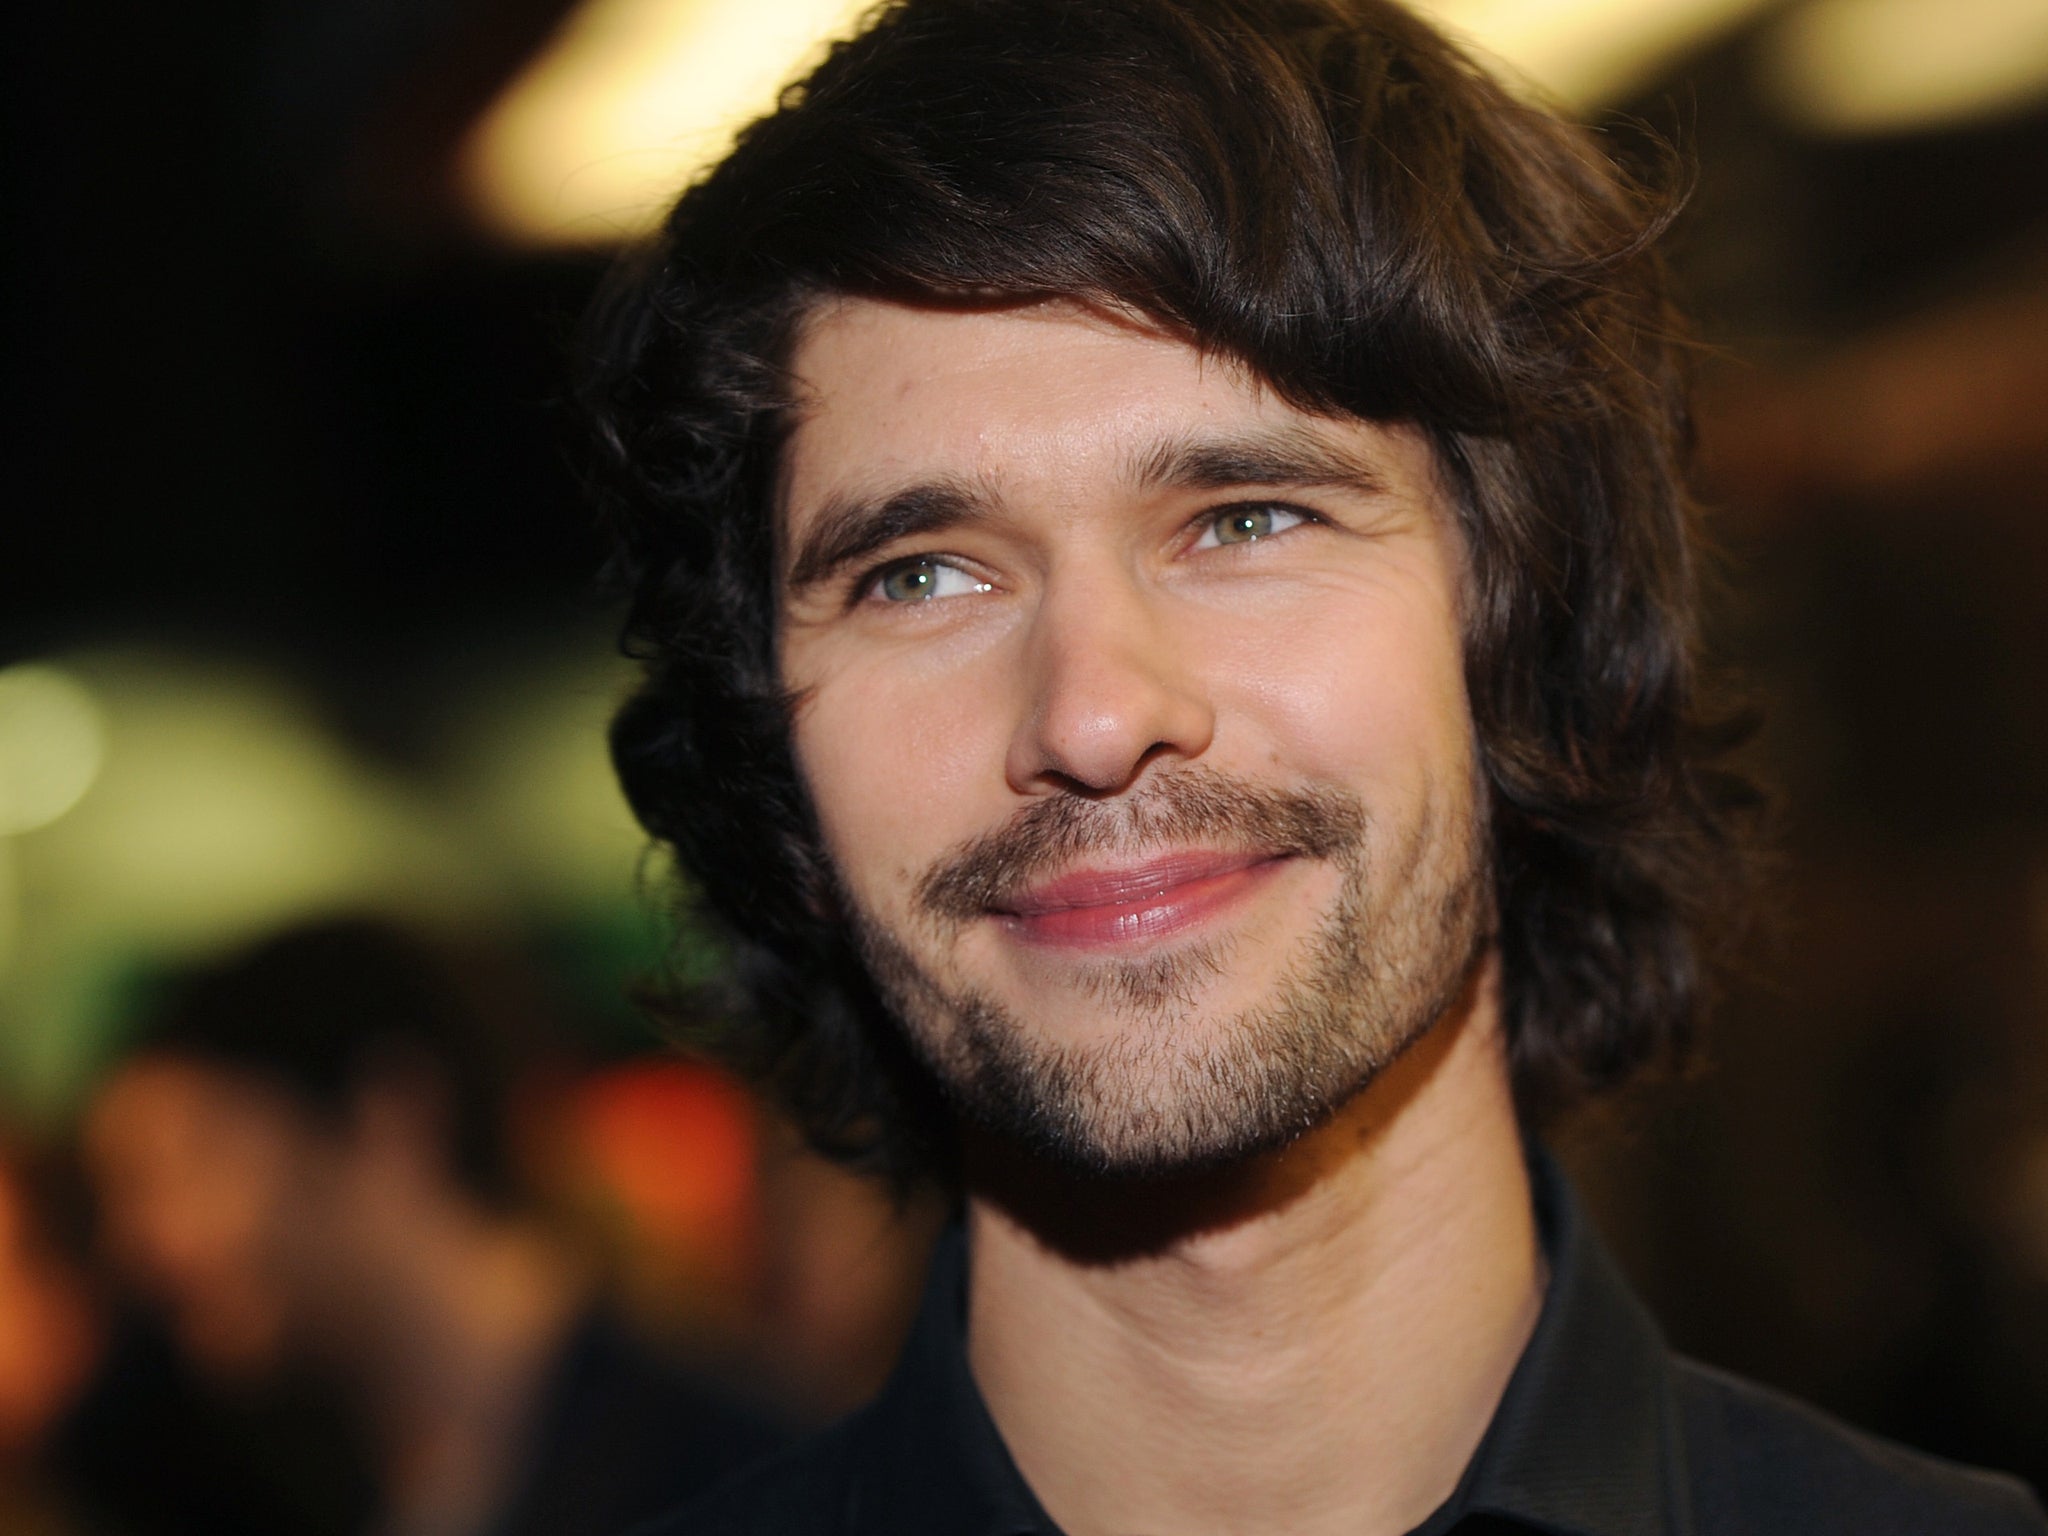 Ben Whishaw is replacing Colin Firth as the voice of Paddington Bear